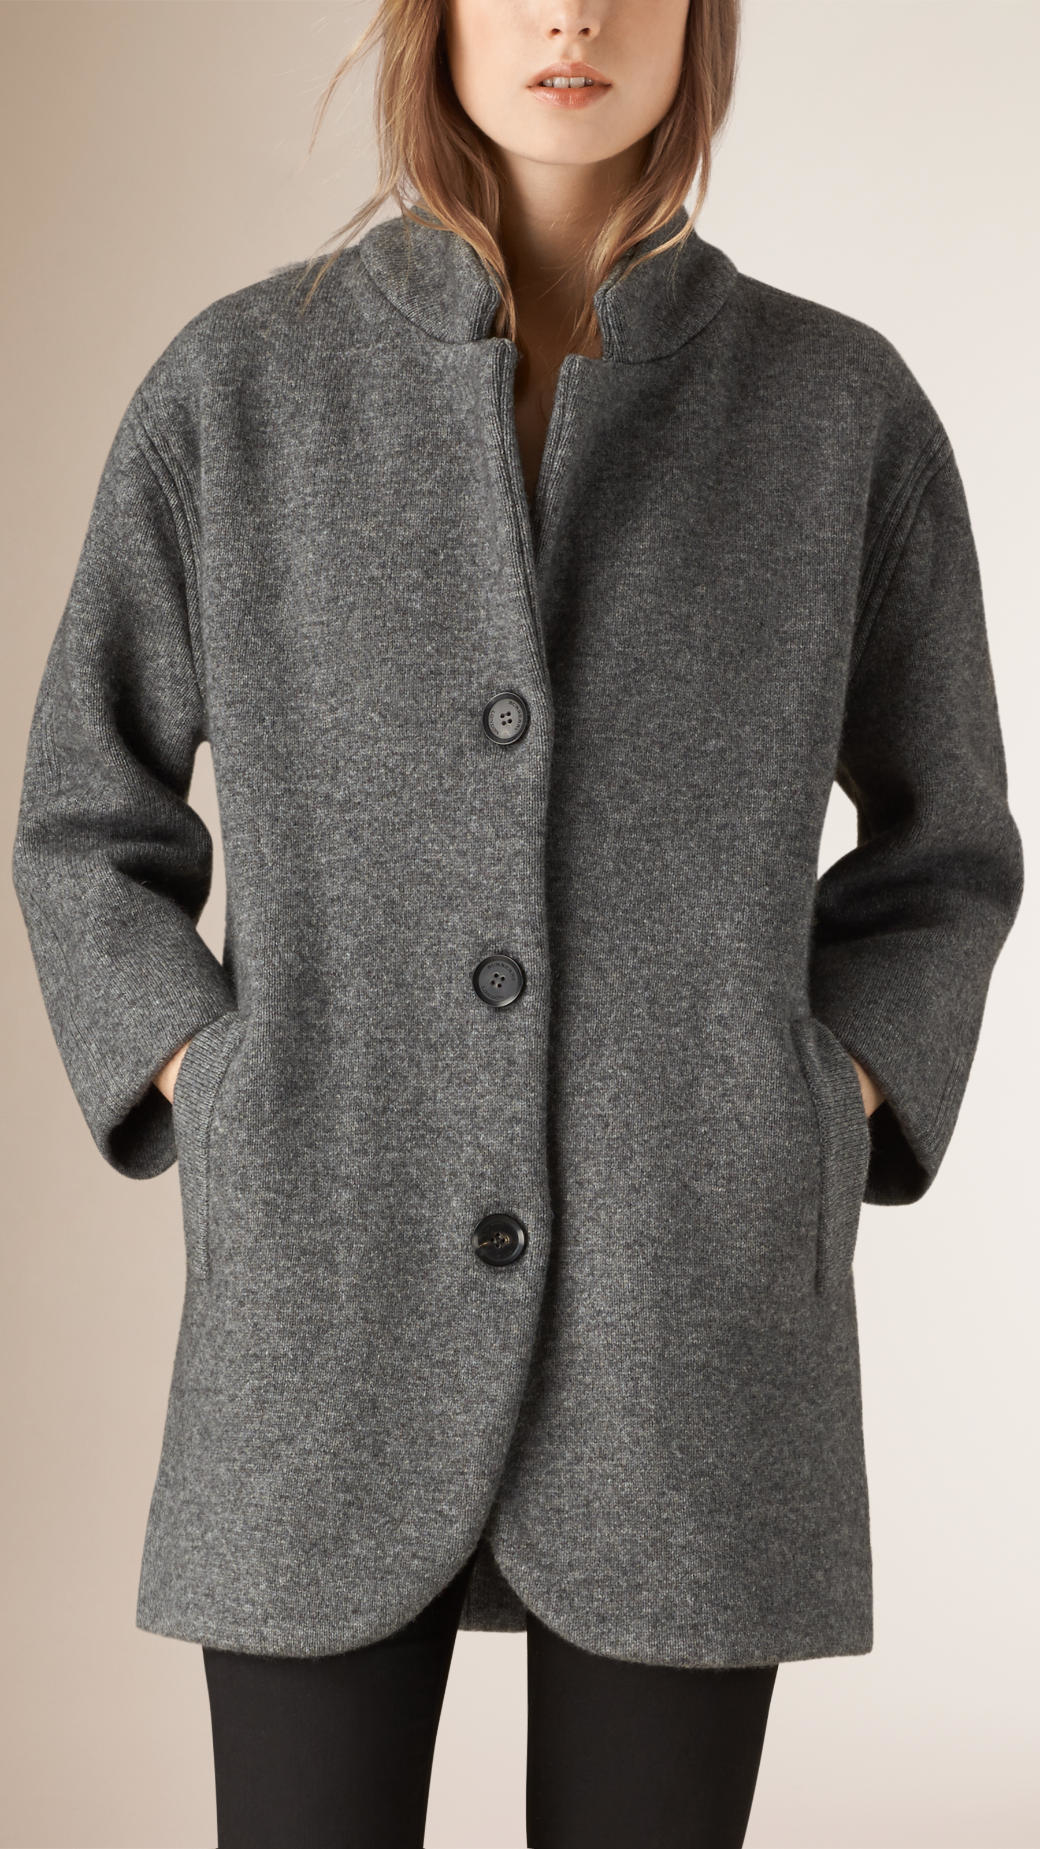 Lyst - Burberry Bonded Wool Blend Cardigan Coat in Gray